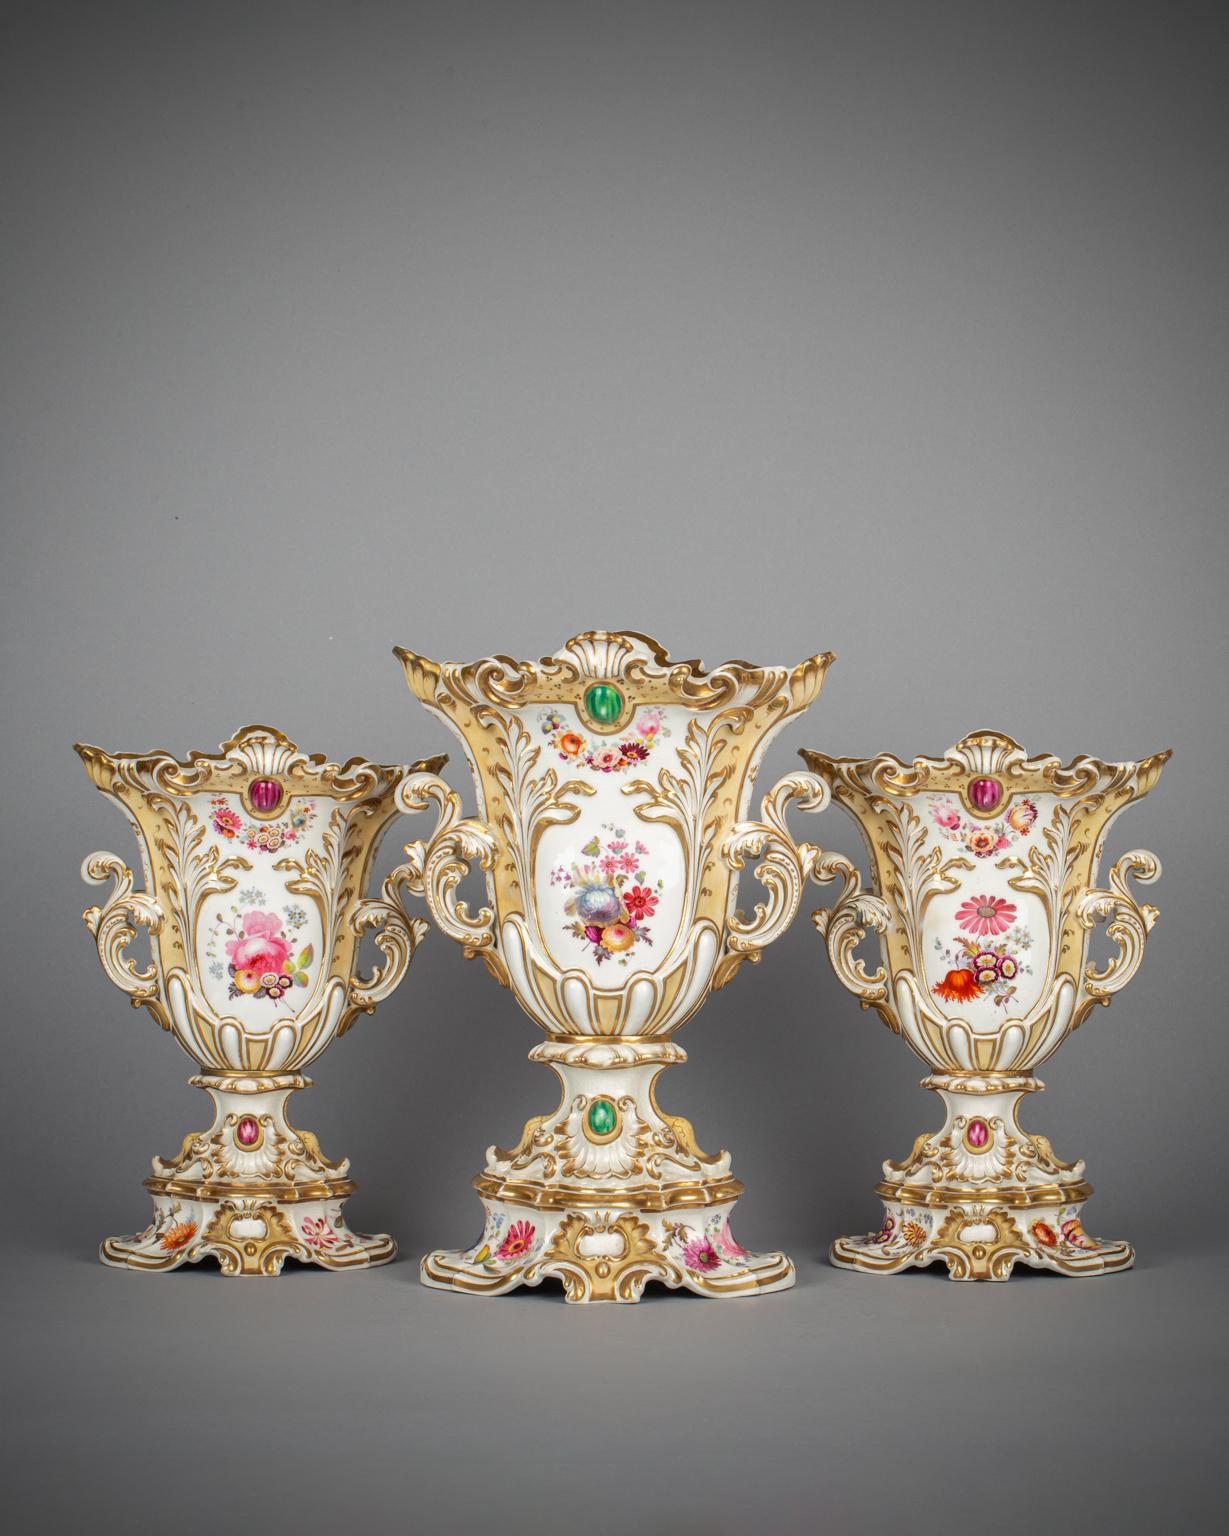 The colored reserves painted with a floral still life, the reverse with sprays of flowers. The bases similarly painted. With molded, gilded scrollwork and 